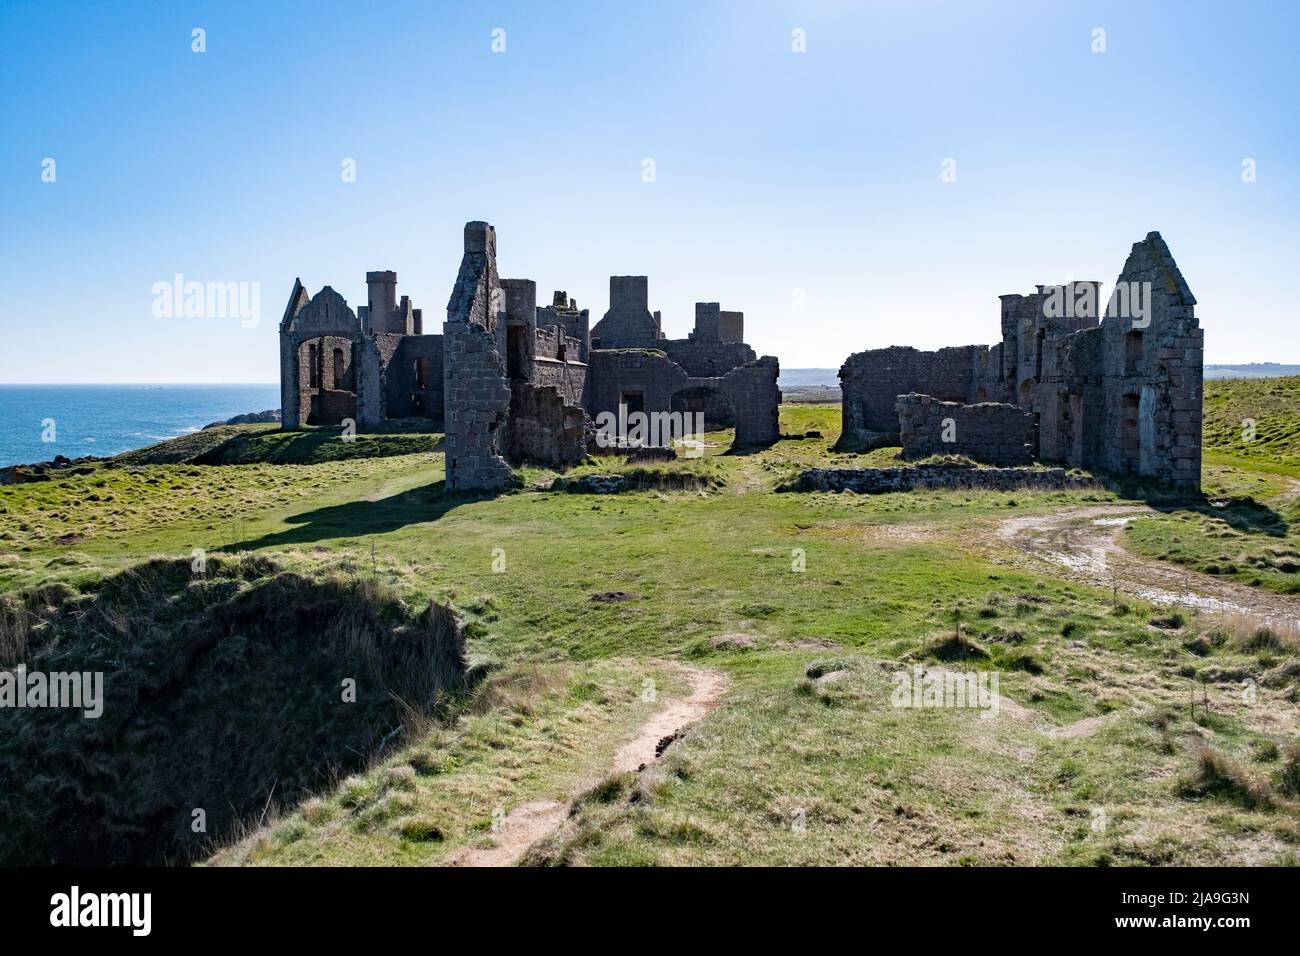 Slains Castle, also known as New Slains Castle to distinguish it from the nearby Old Slains Castle, is a ruined castle in Aberdeenshire, Scotland. Stock Photo